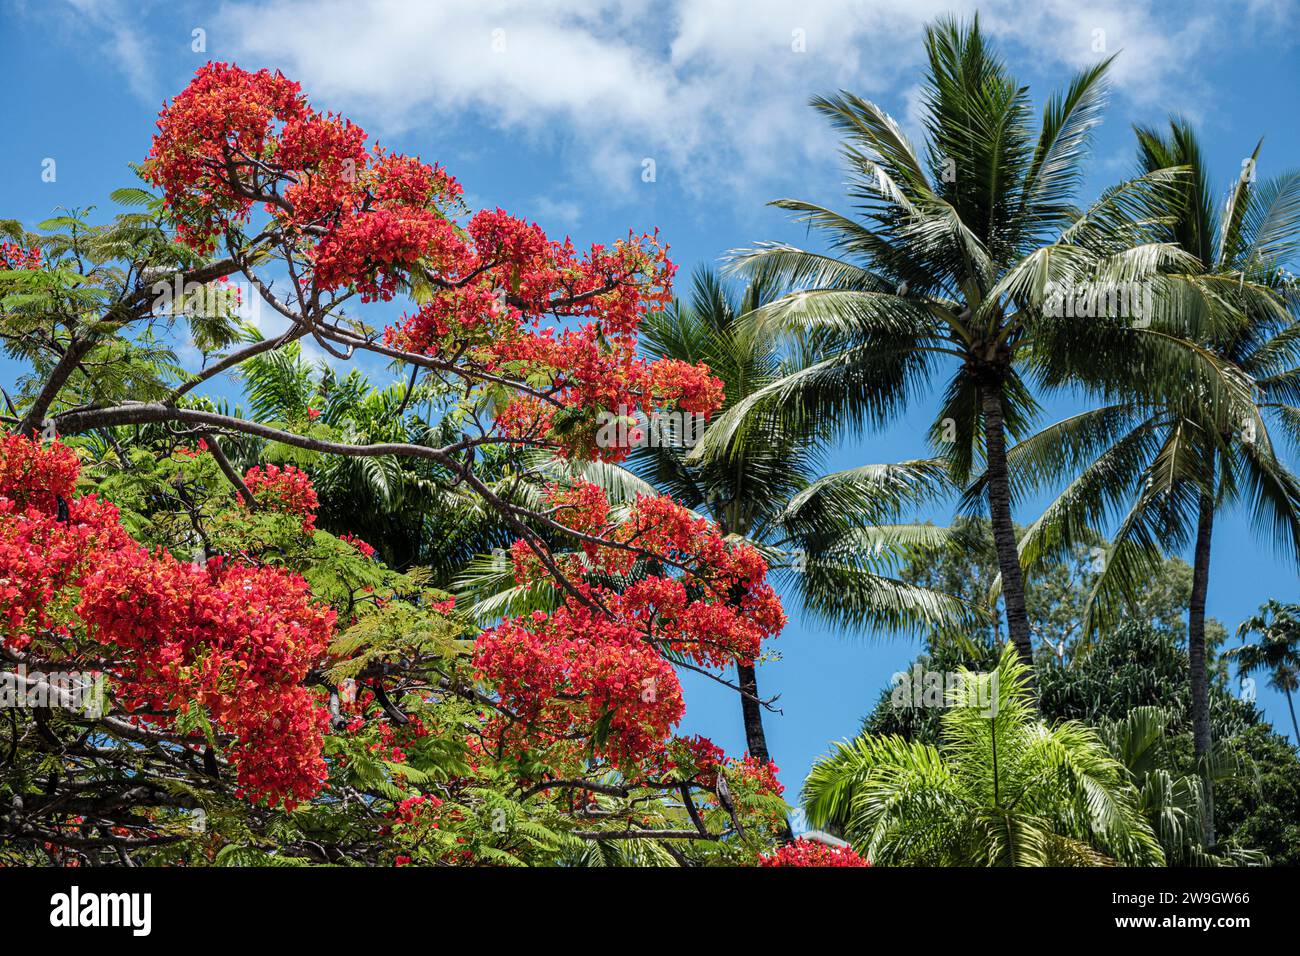 A Flame tree or royal poinciana in flower and coconut palms at Port Douglas, Queensland, Australia Stock Photo